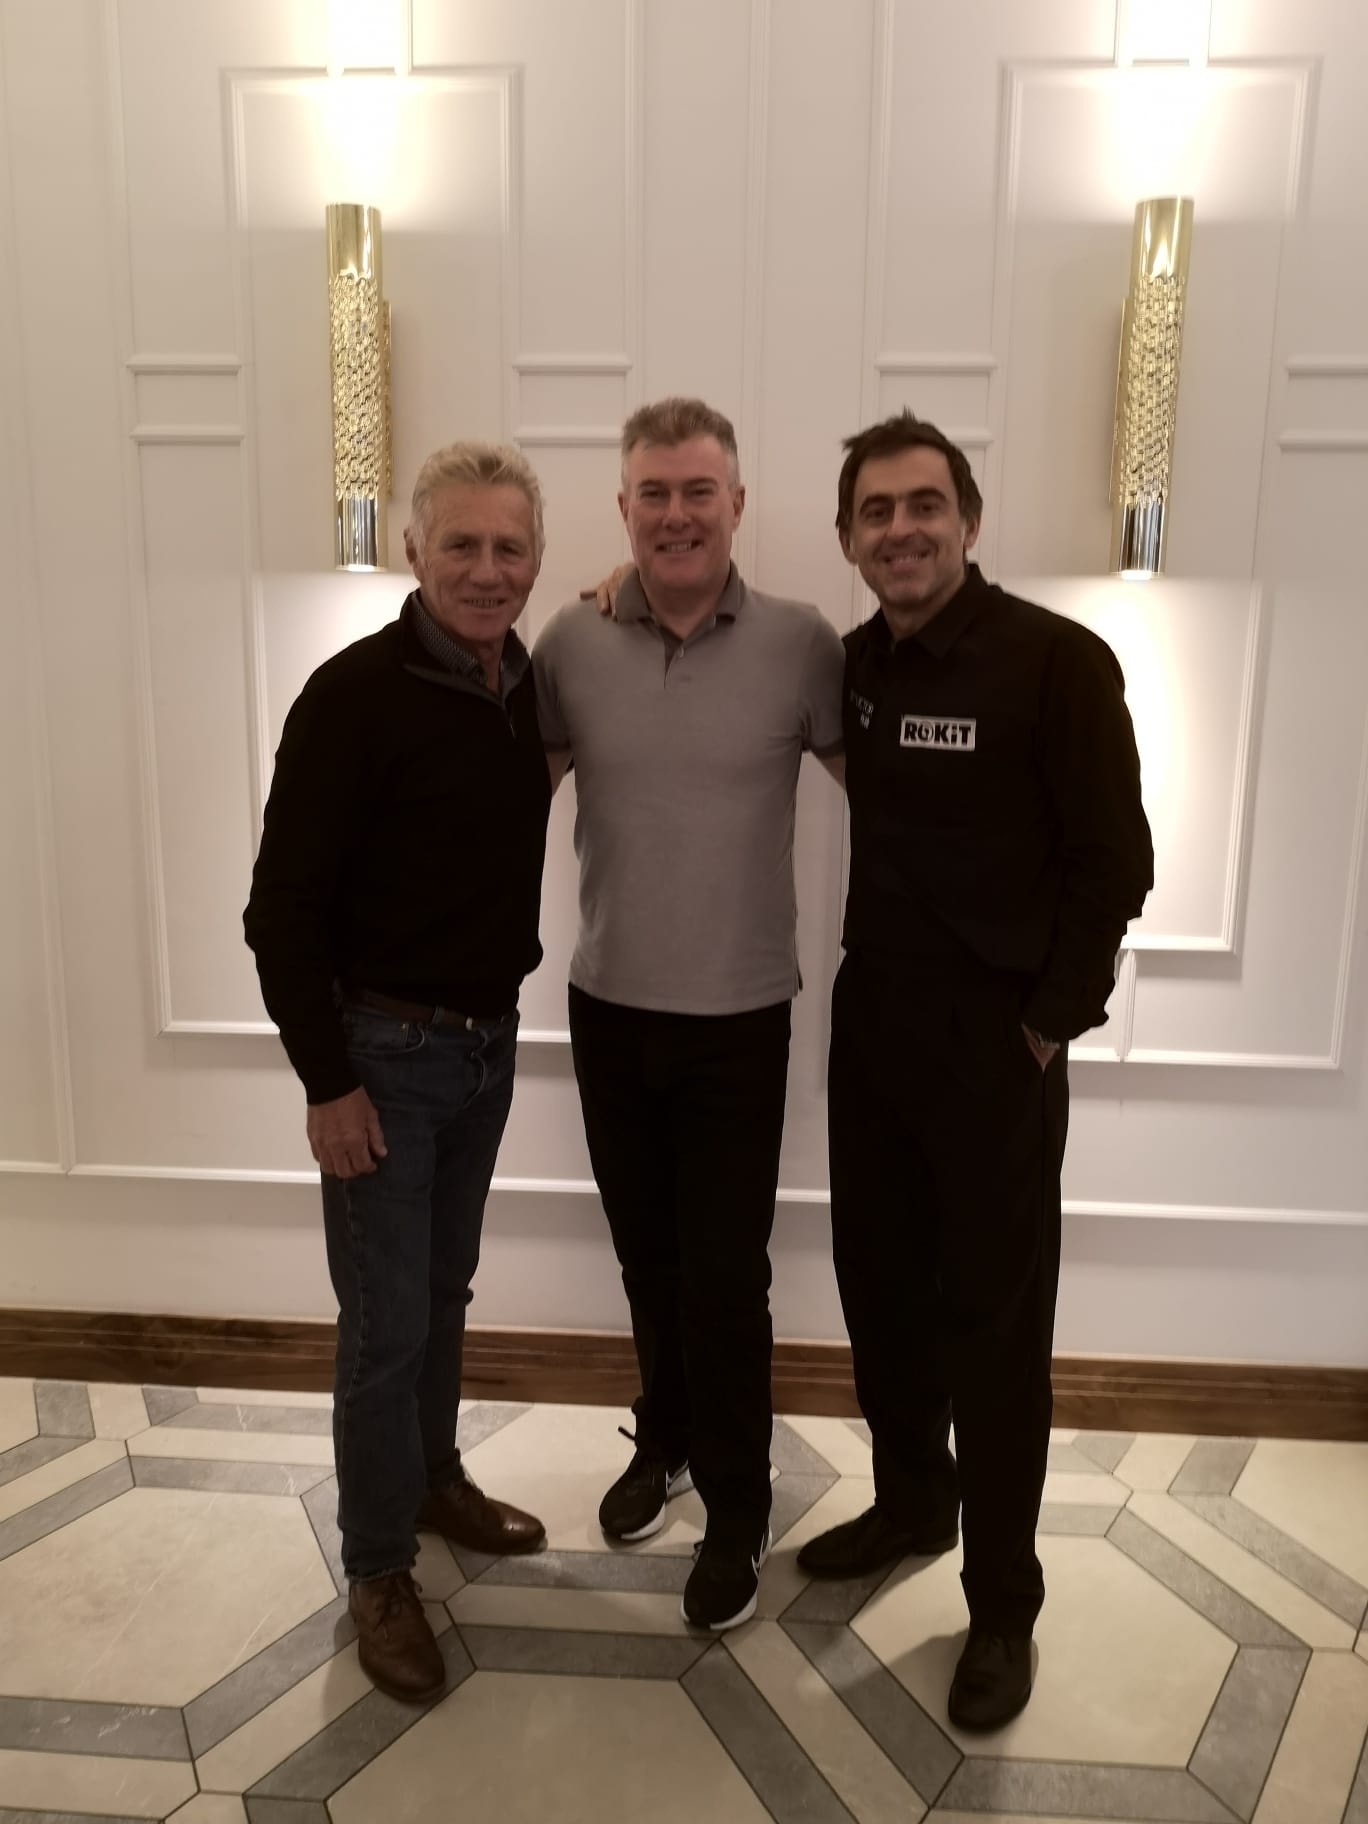 Eamonn Christie with seven-time world snooker champion, Ronnie O\'Sullivan, and former world 5000m champion Eamonn Coughlan